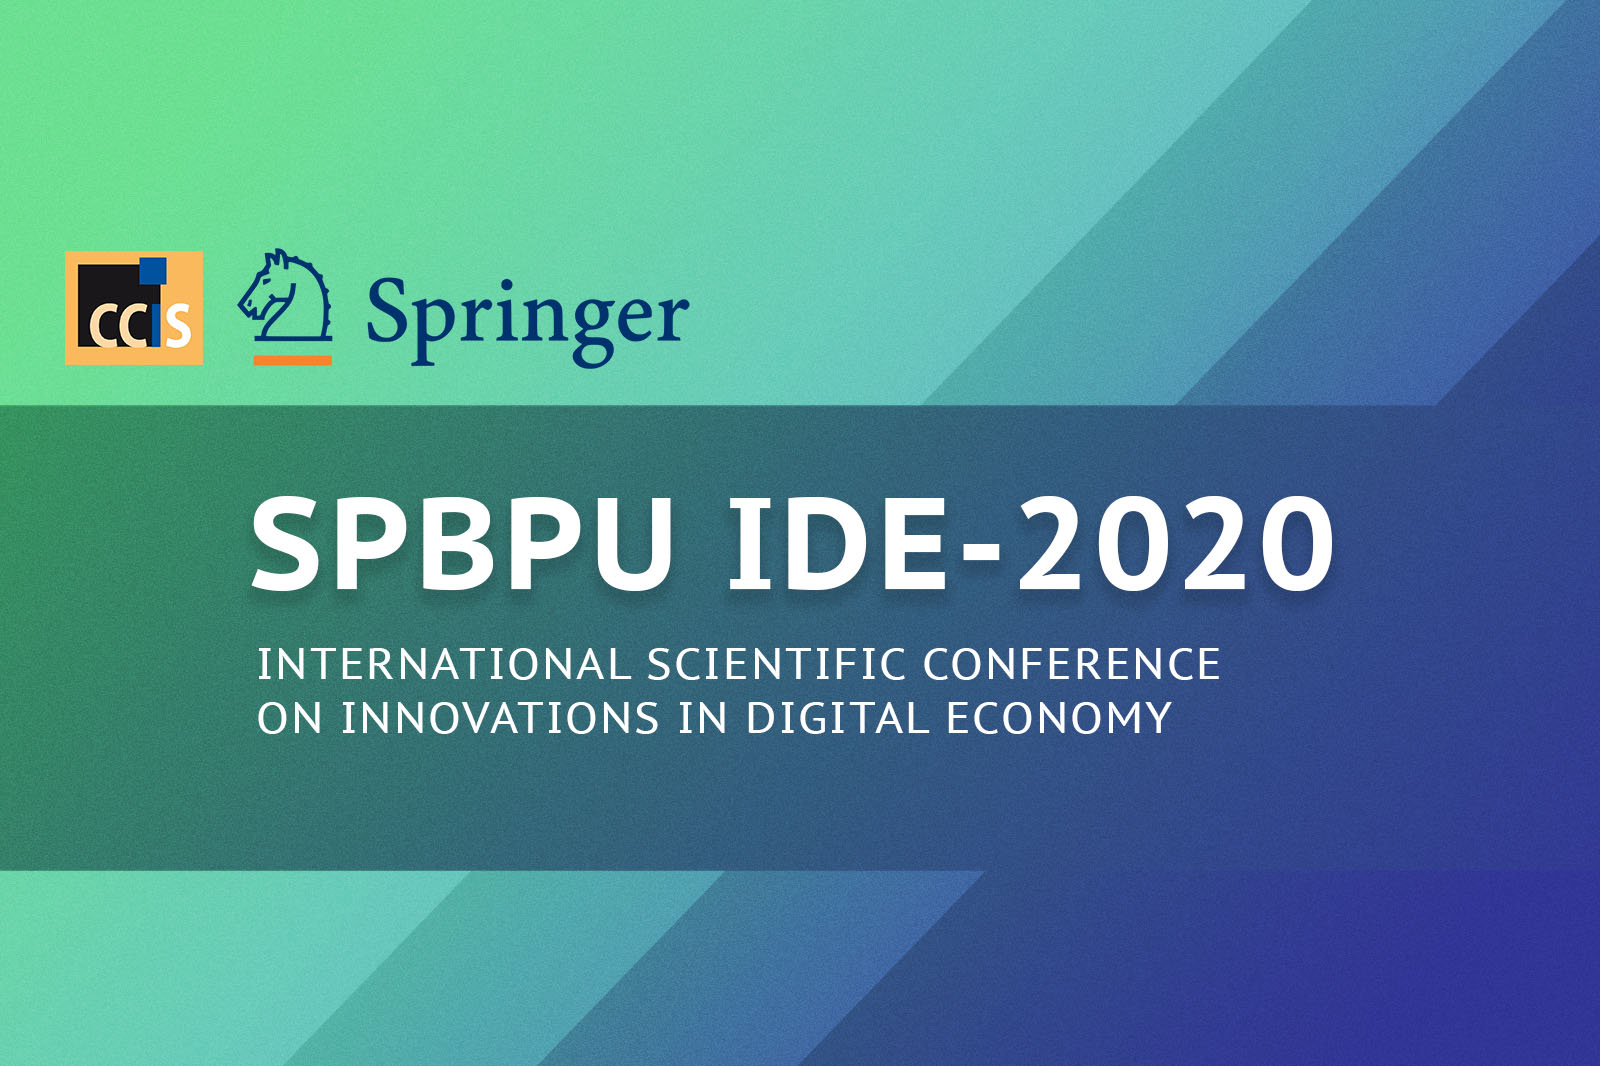 Springers’ CCIS has published selected materials from SPbPU IDE 2020 at Post-proceedings issue!